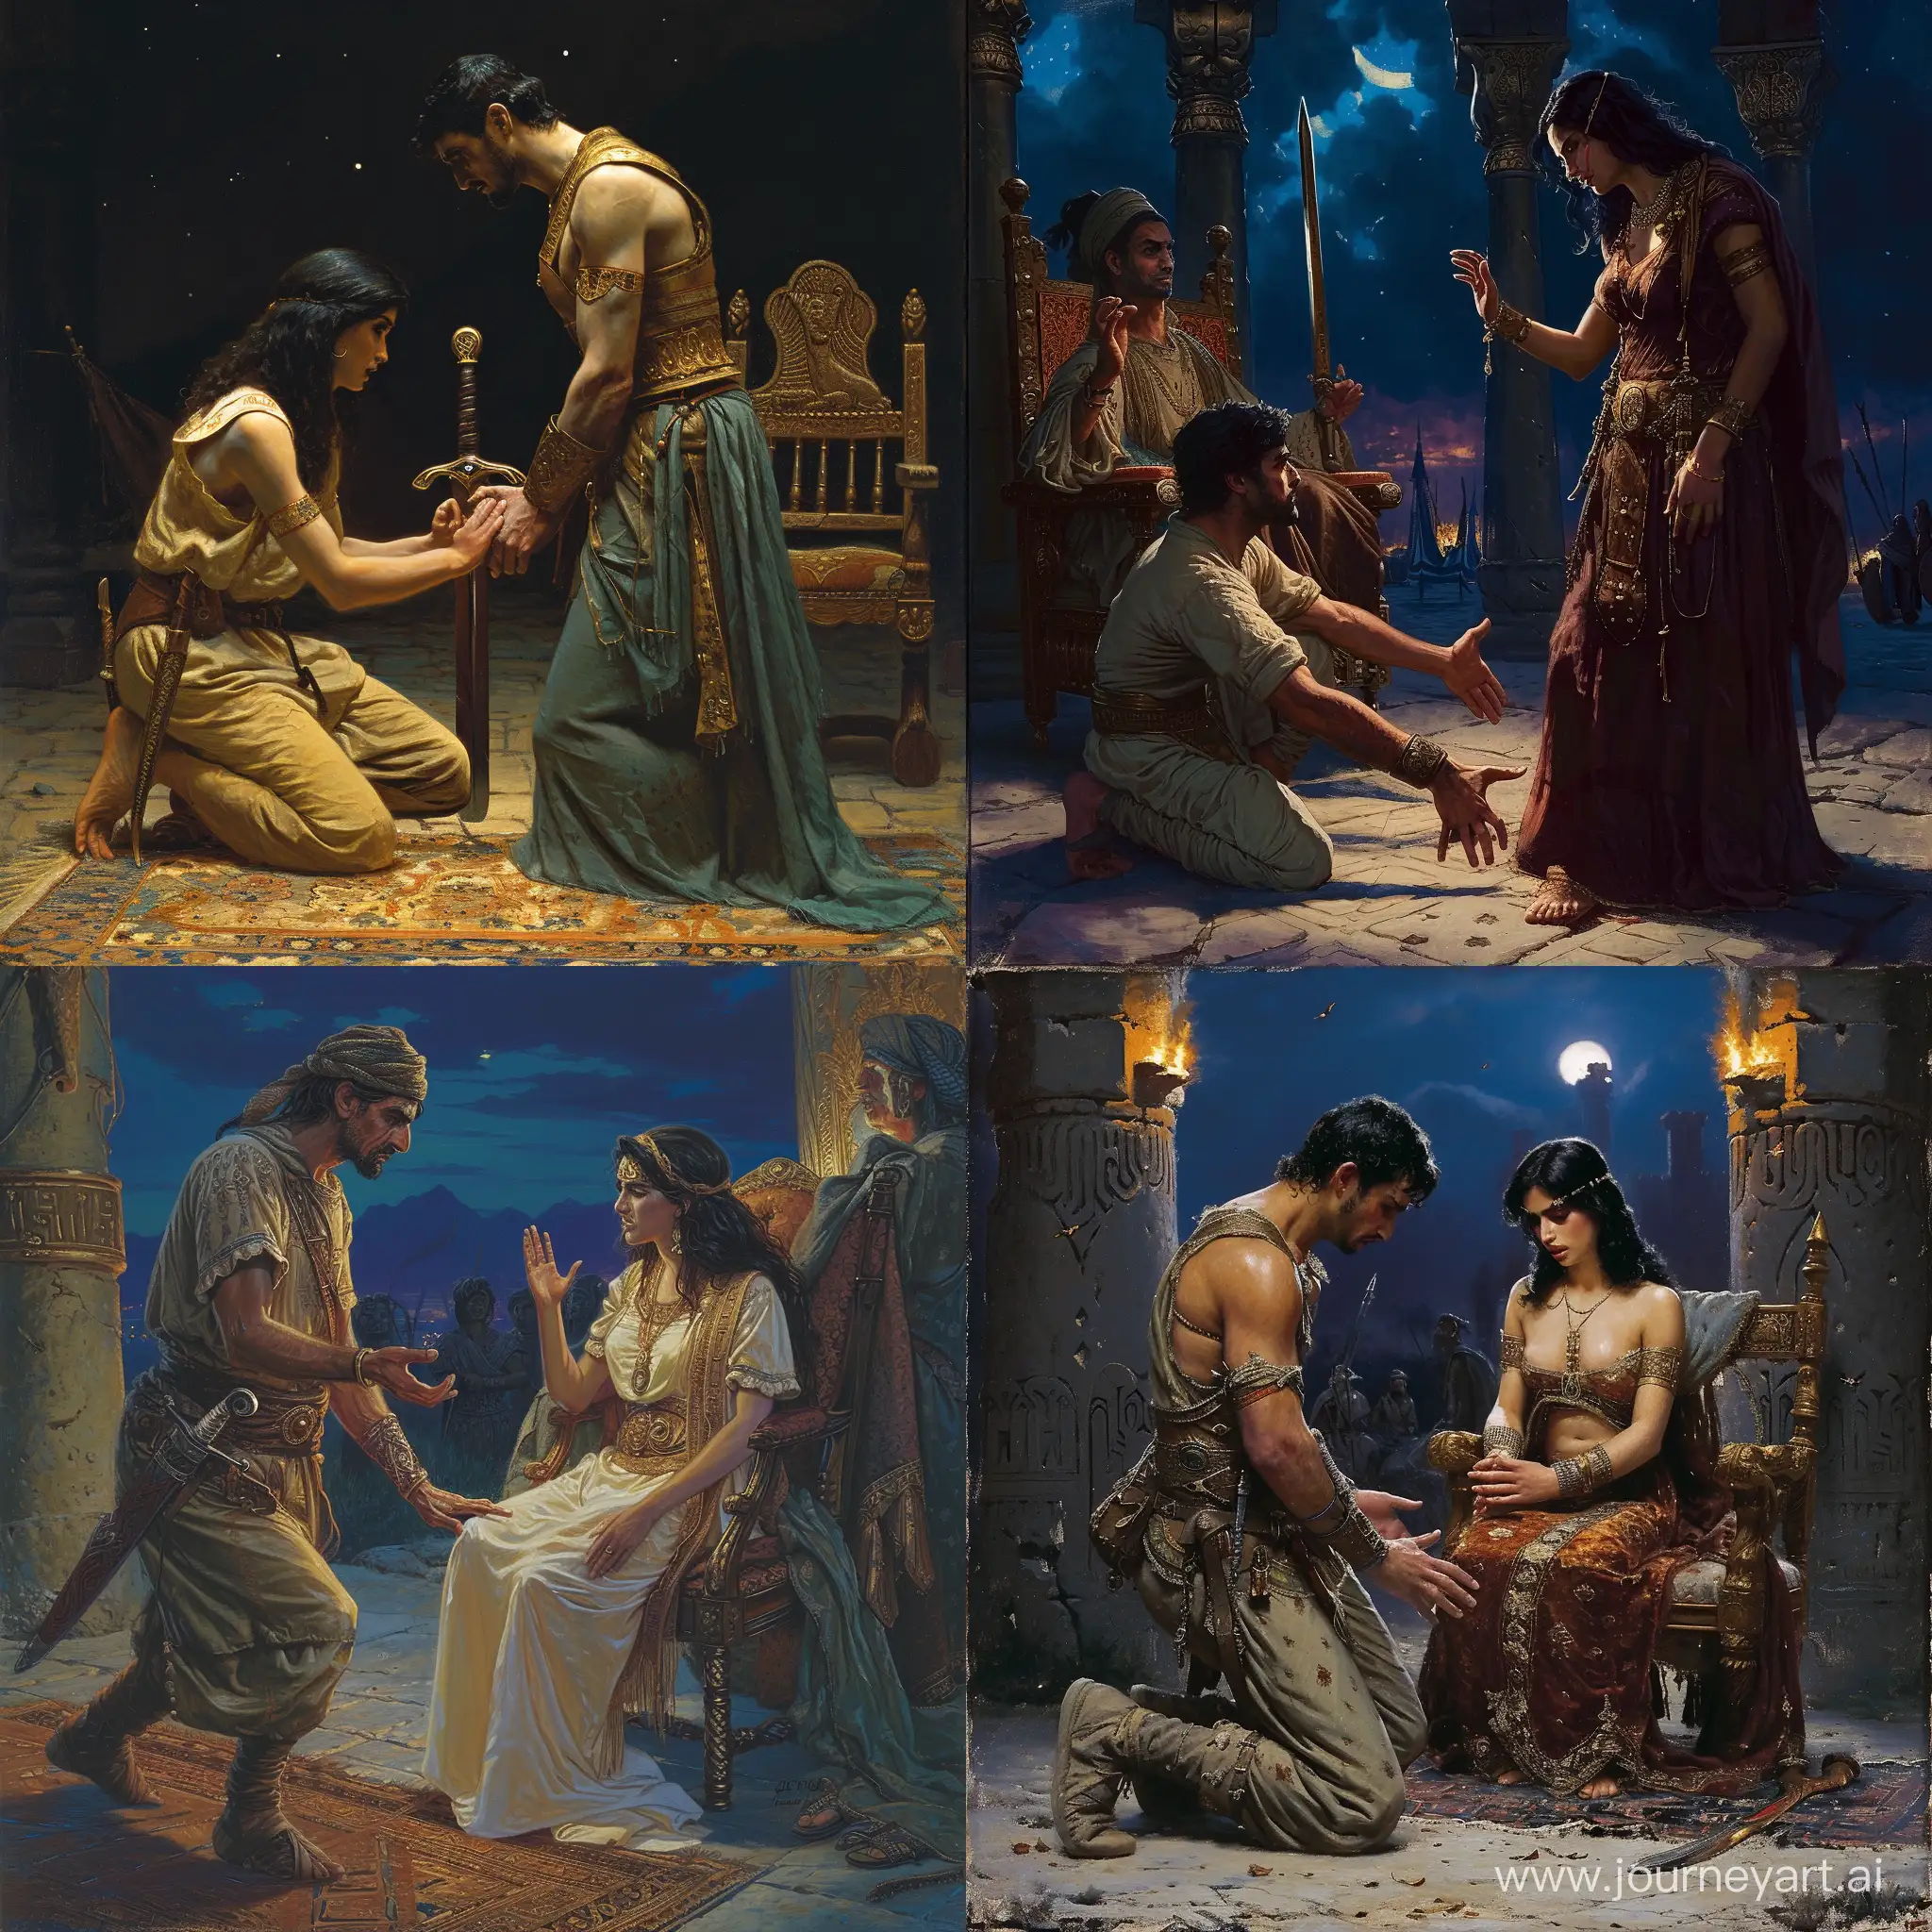 The ancient Arab soldier is kneeling in fear in front of the beautiful Persian princess and his hands are shaking and begging, it is night and there is a sword in the princess's hand and the princess is sitting on the king's chair.